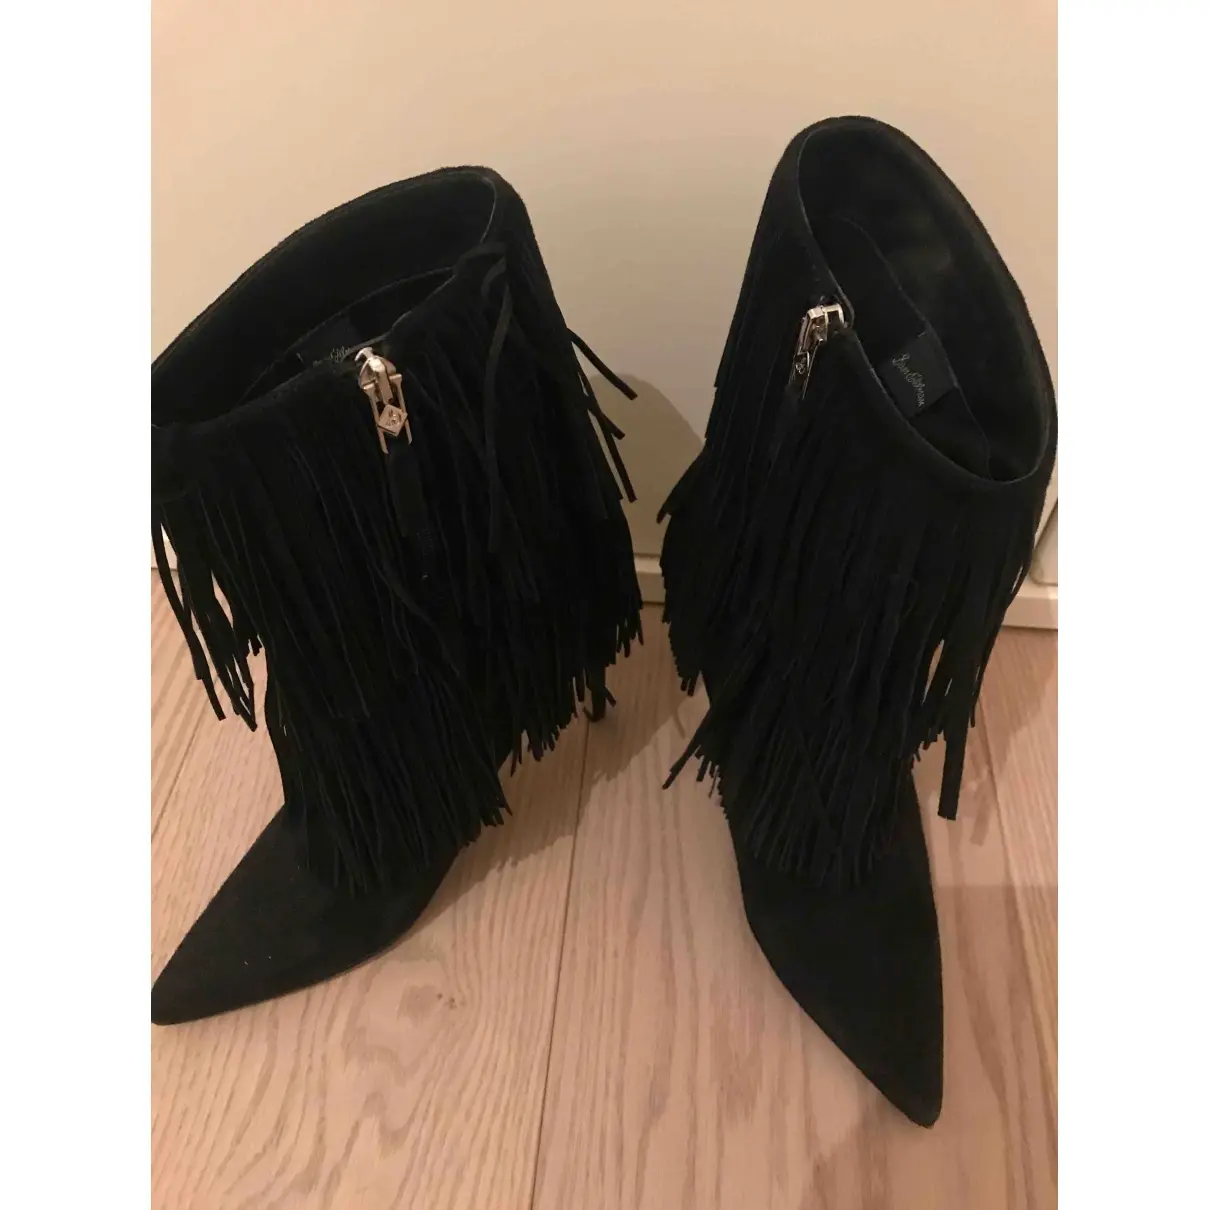 Sam Edelman Ankle boots for sale